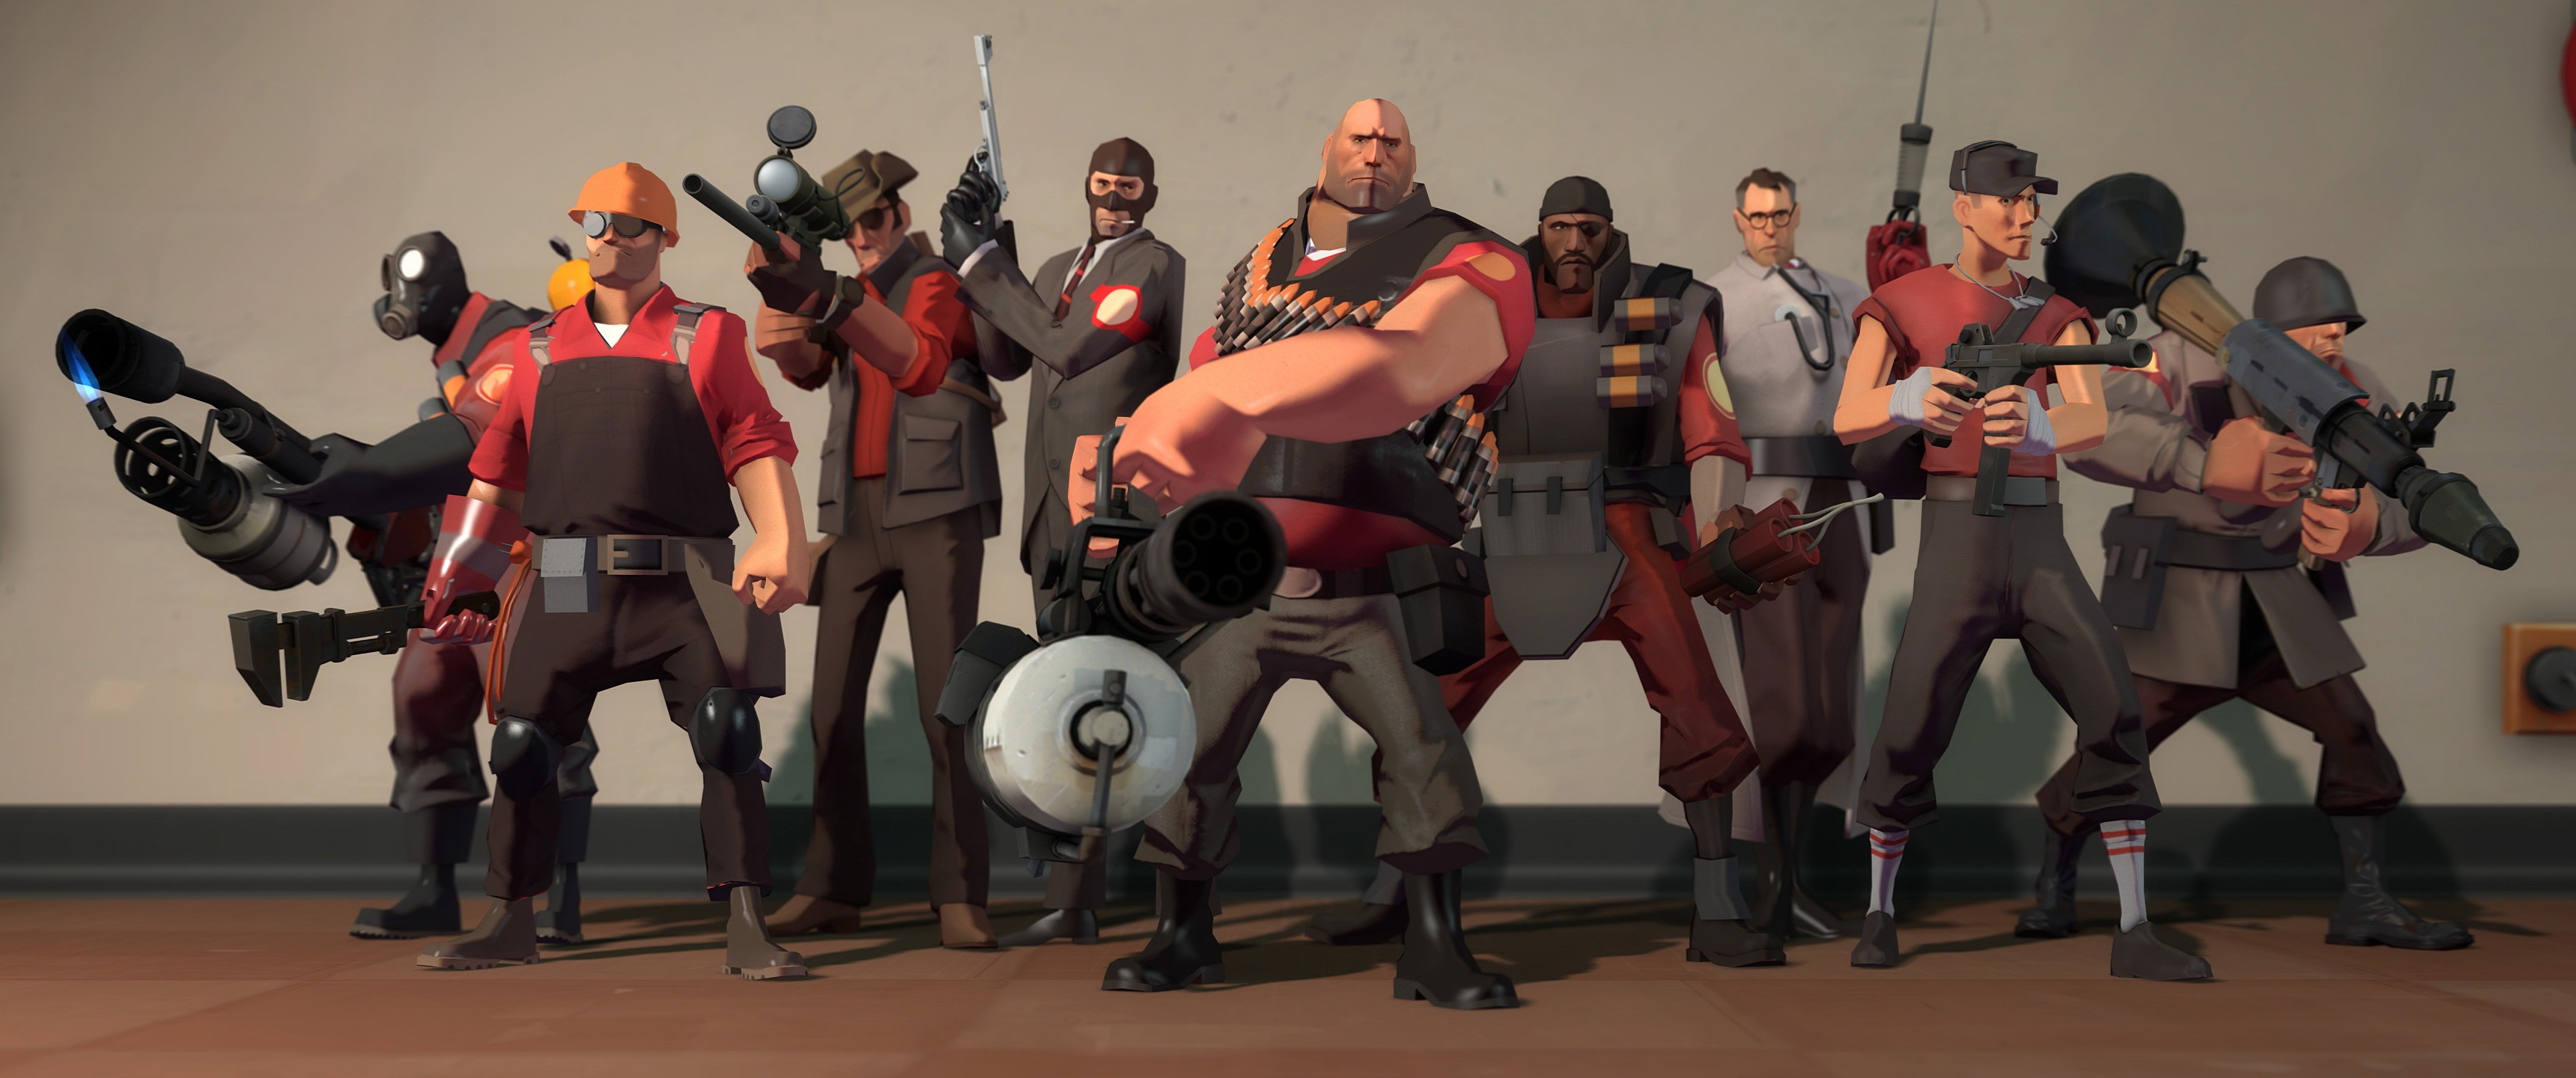 General 3440x1440 Team Fortress 2 video games Pyro (TF2) Engineer (TF2) Sniper (TF2) Spy (character) Heavy (TF2) Demoman Medic (TF2) Scout (TF2) Soldier (TF2) PC gaming video game art